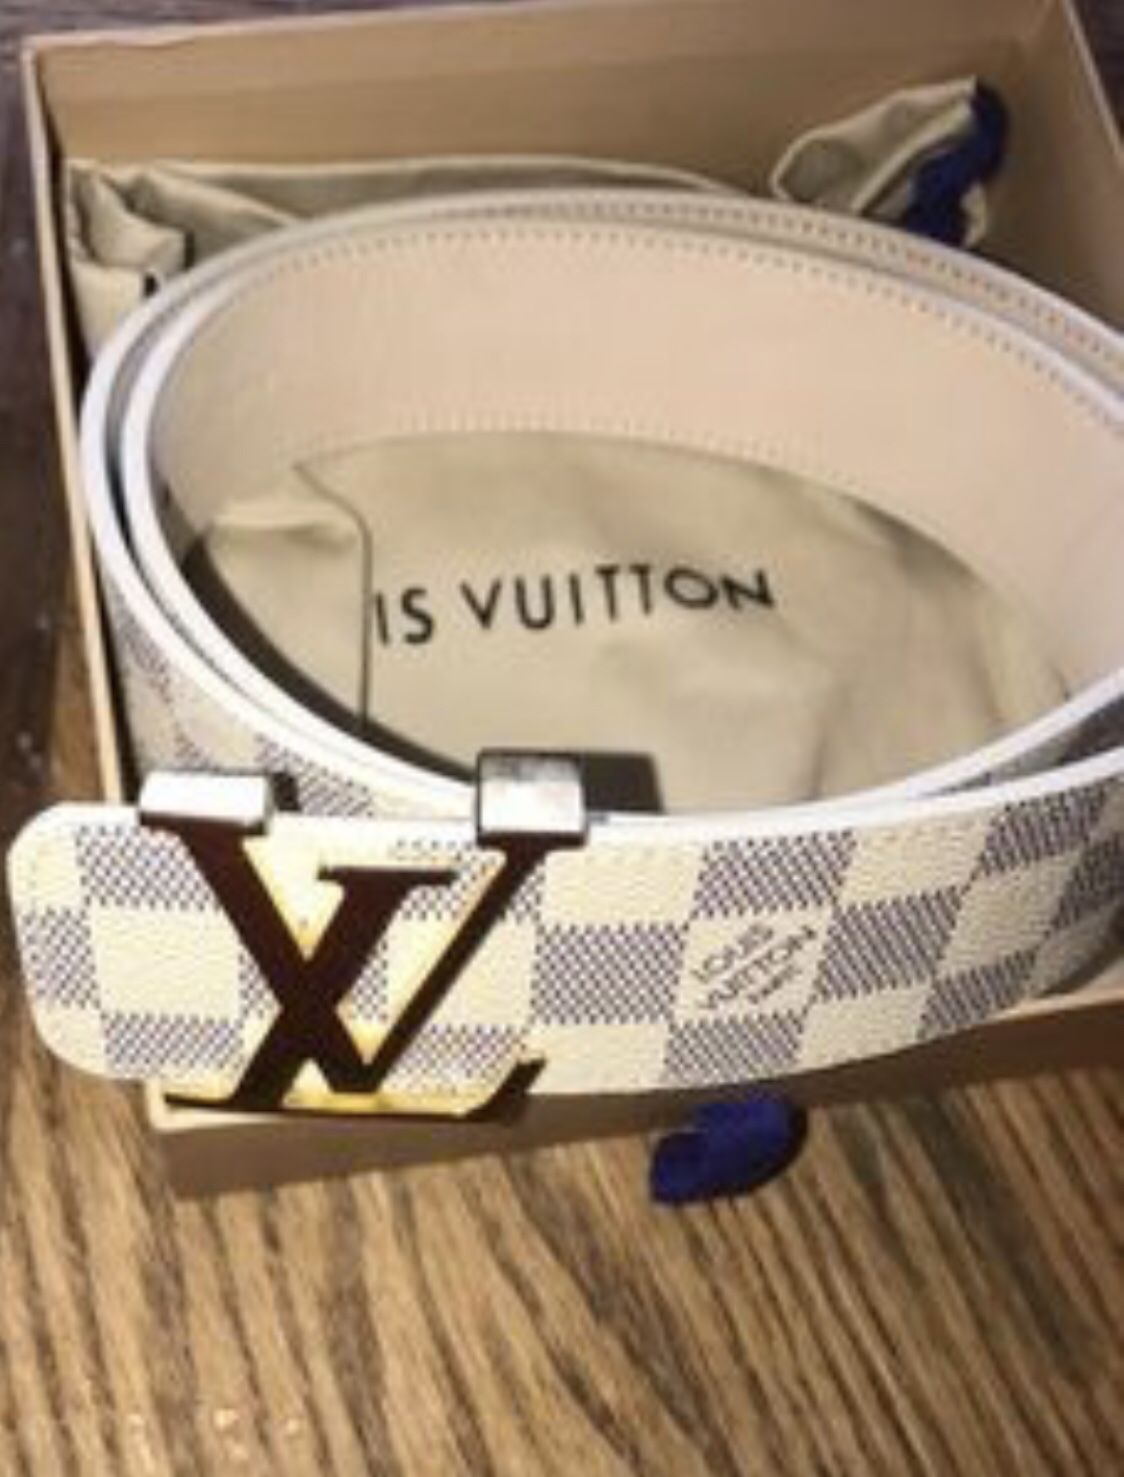 Authentic Louis Vuitton checkered belt (with Louis